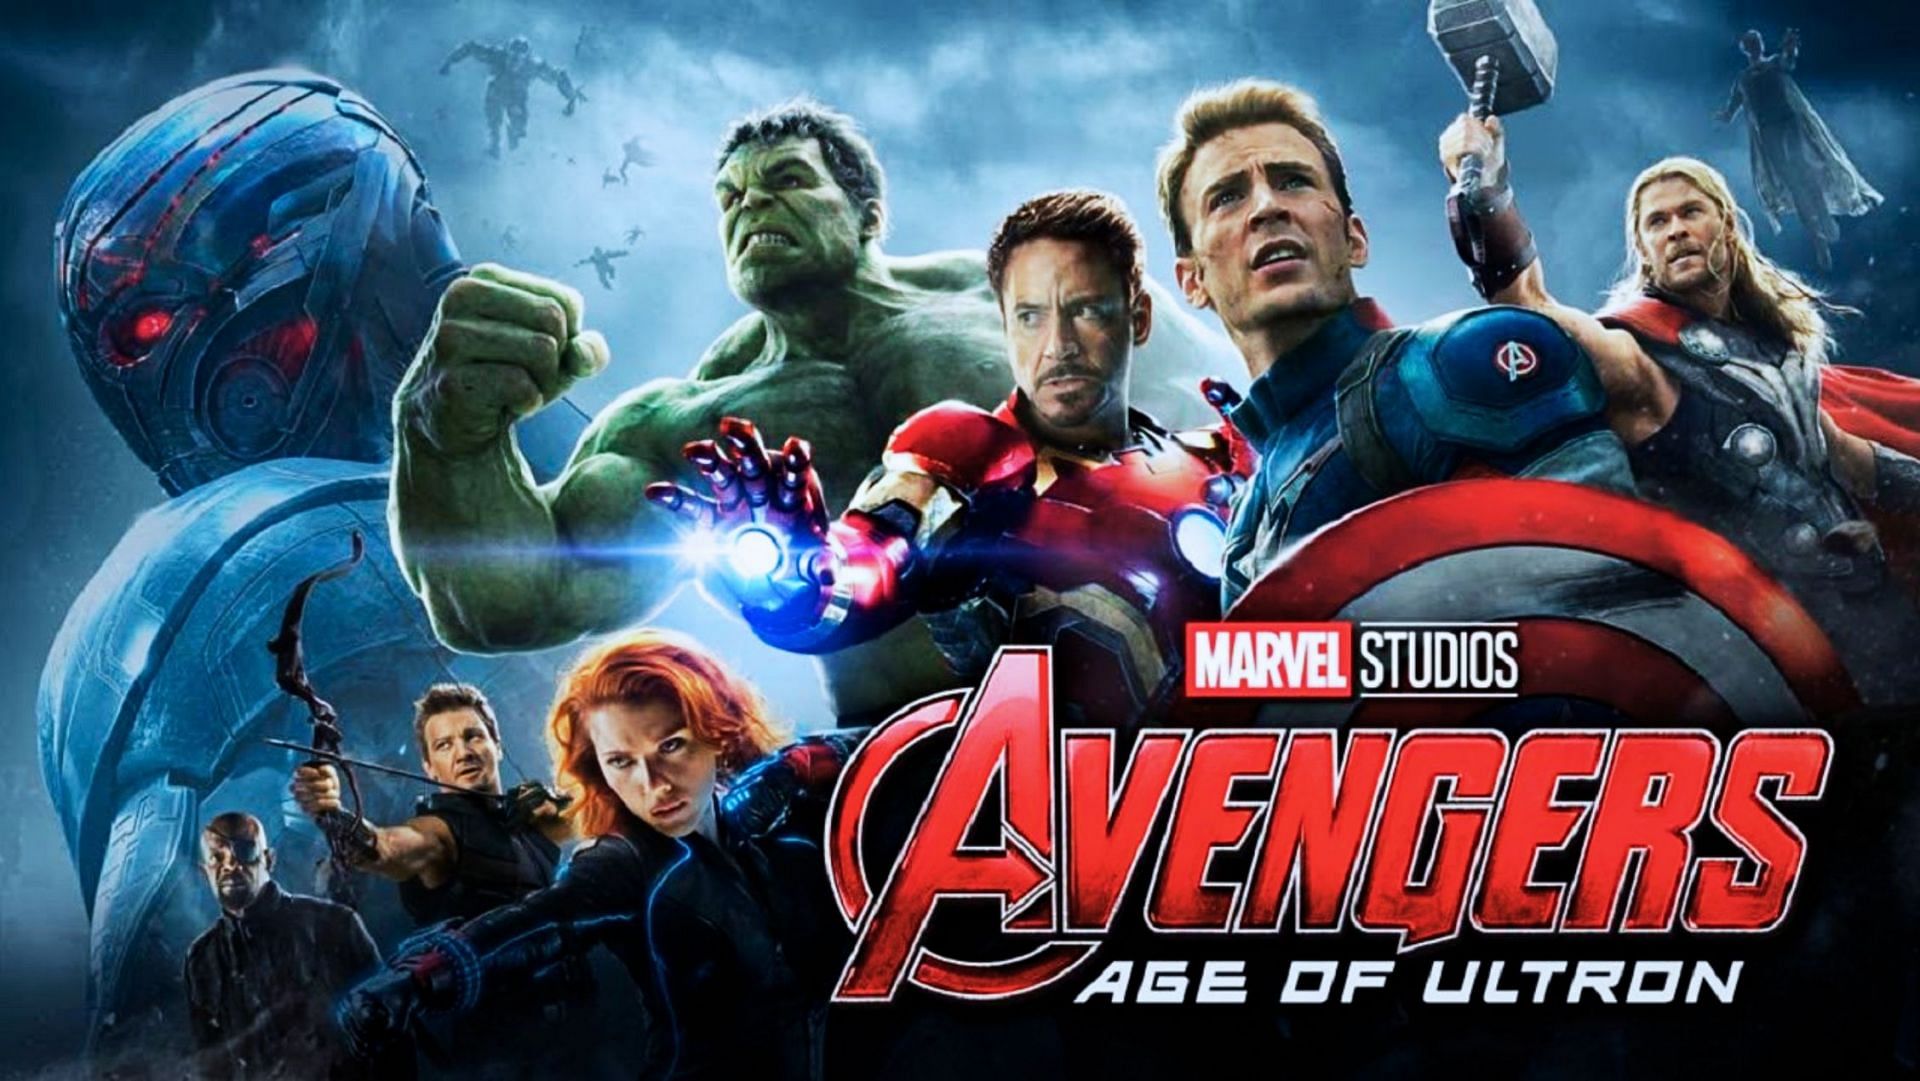 The Avengers assemble once again in Age of Ultron, a movie that deserves more recognition for its strong cast, memorable villain, thrilling action sequences, and crucial role in setting up the future of the MCU (Image via Marvel Studios)